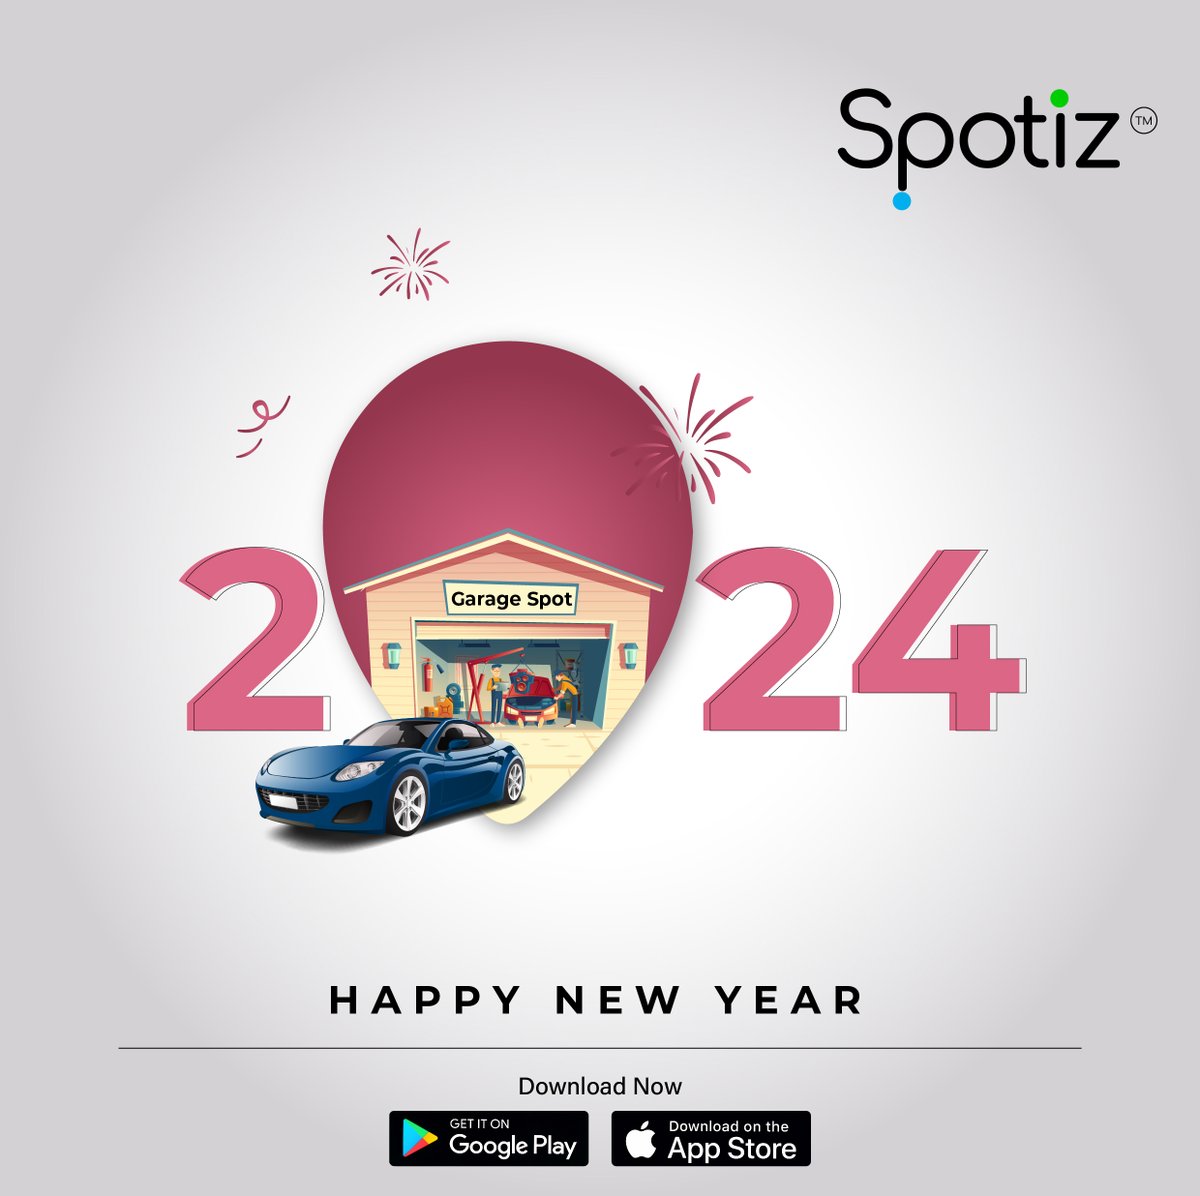 The world is a #SpotLight 🧩🌿🌍, so let's protect and cherish it!
We wish you an extraordinary year 2️⃣0️⃣2️⃣4️⃣, full of joy, health and prosperity! 
🌟💚💎
On this occasion, we'd like to welcome our newest #spot: the #Garage #Spot.
🛠🛵🚗
#CollectiveIntelligence #People2People